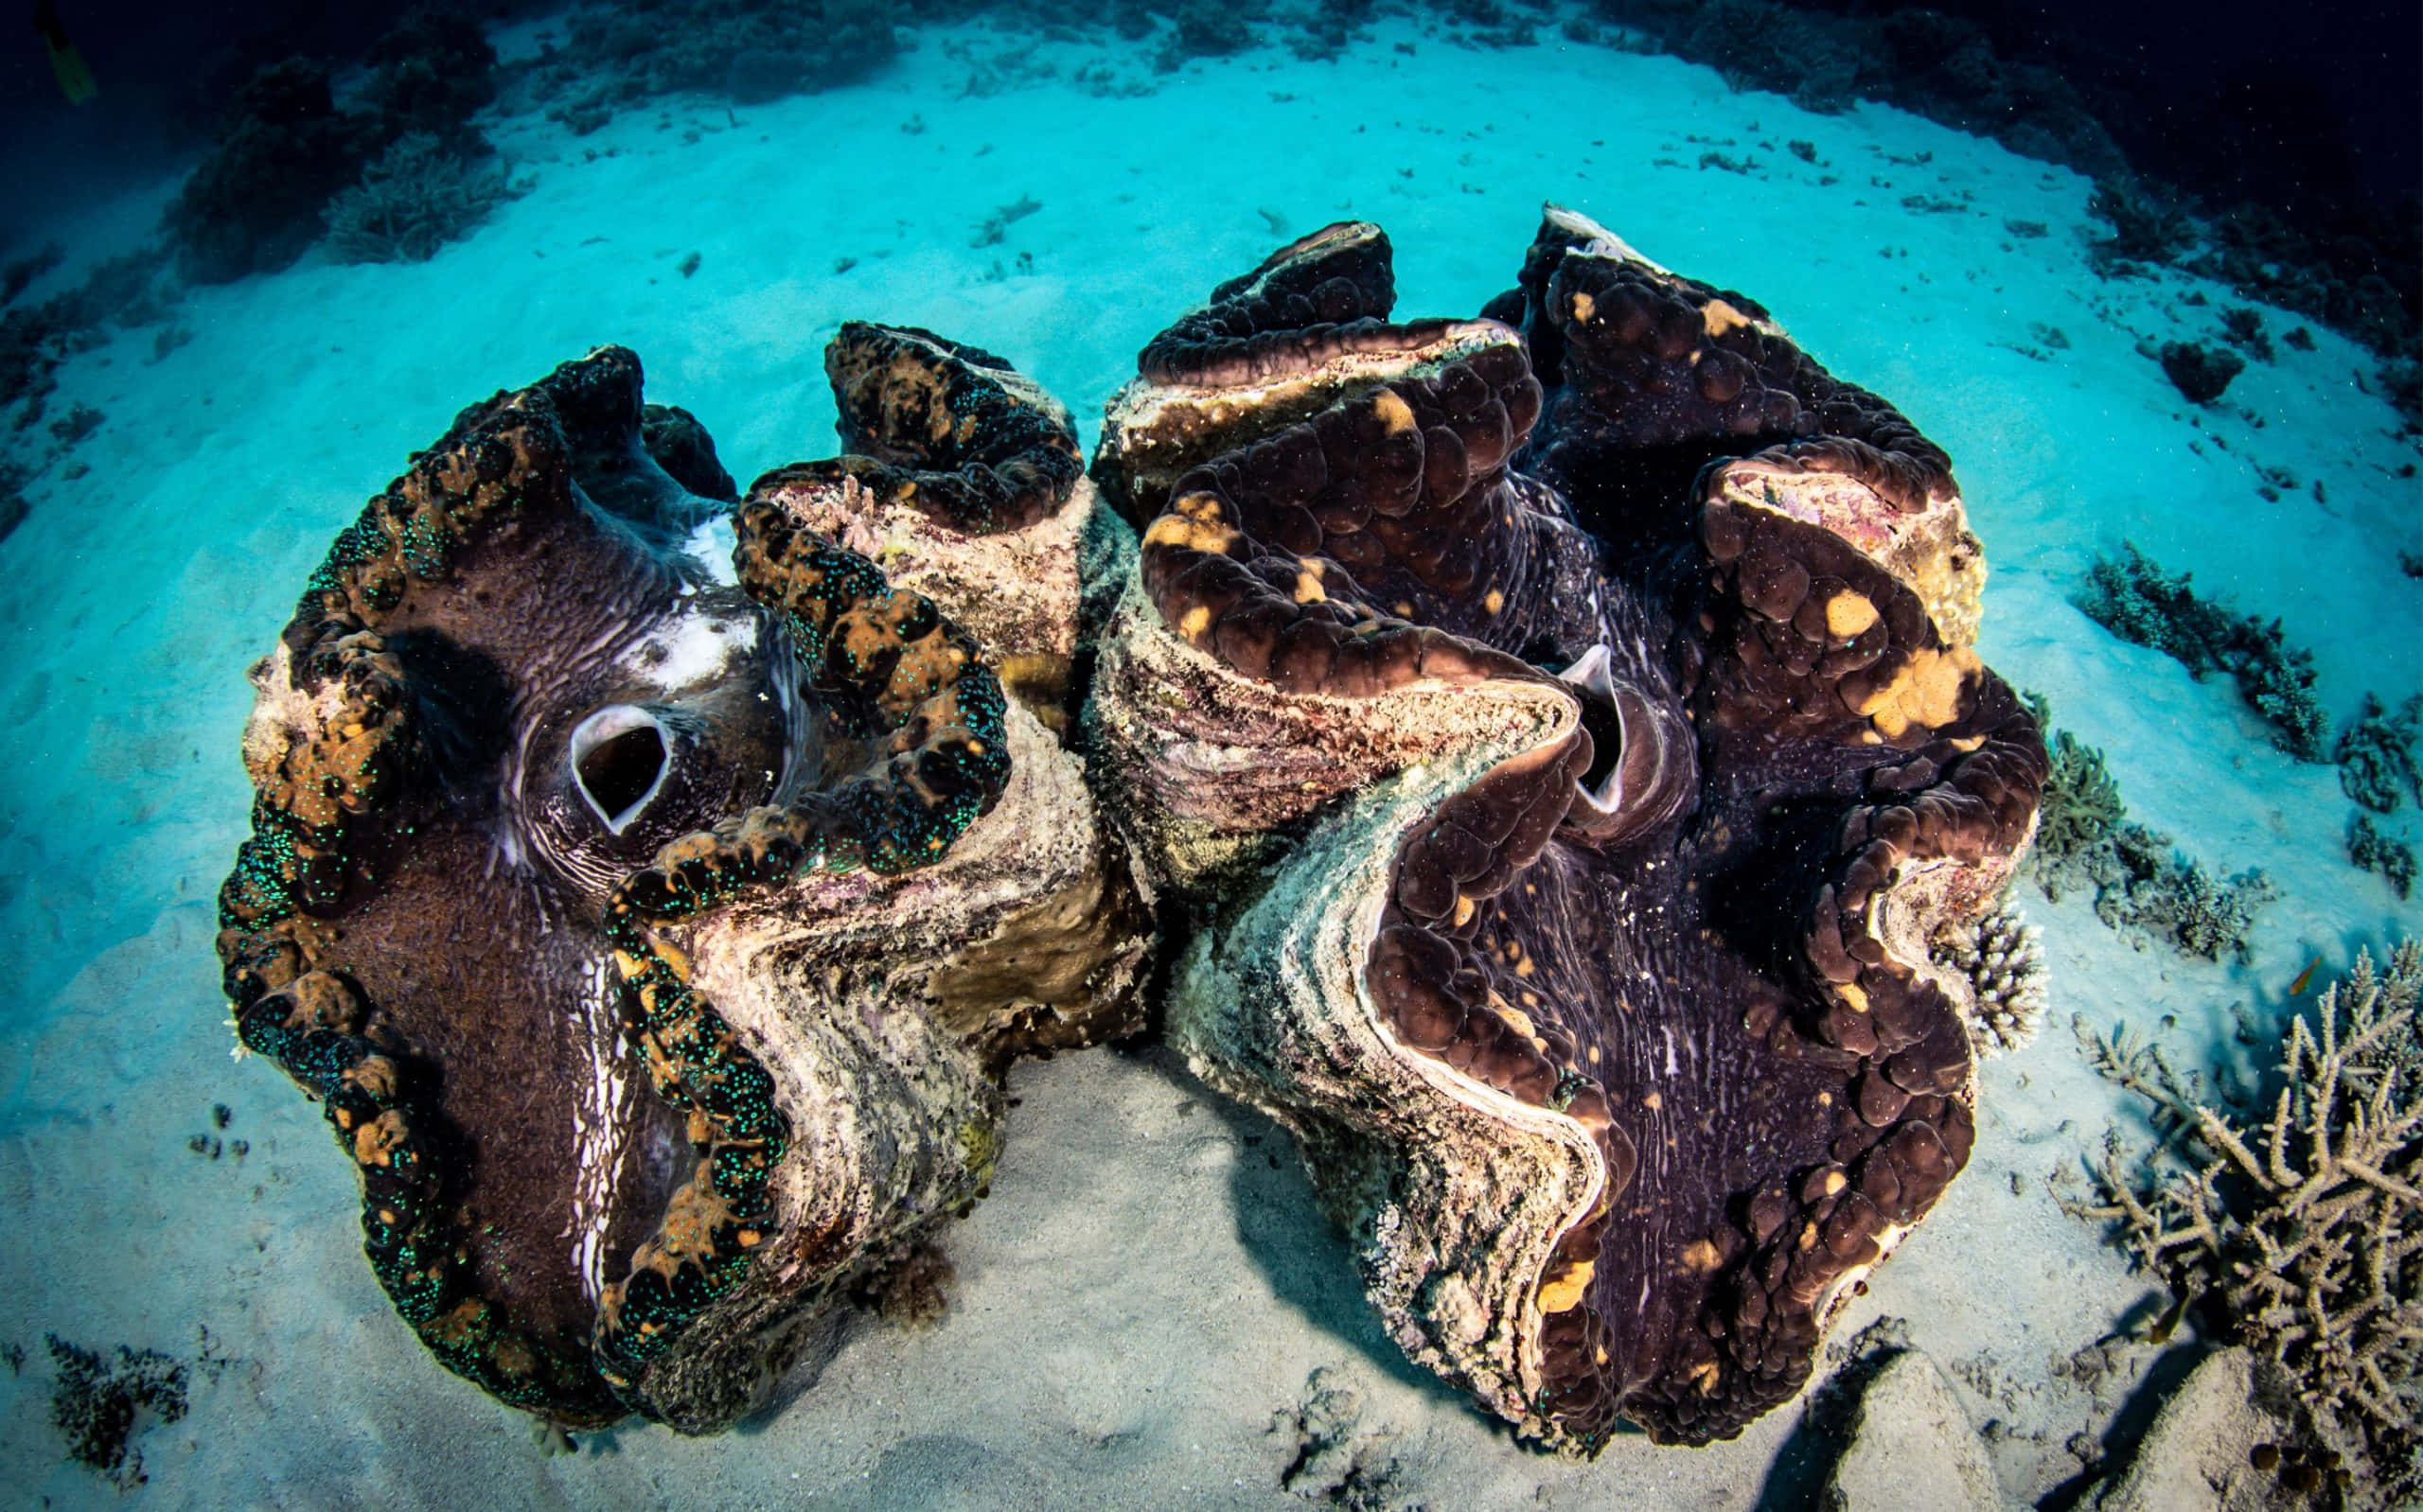 Majestic Underwater View Of A Giant Clam In Its Natural Habitat. Wallpaper